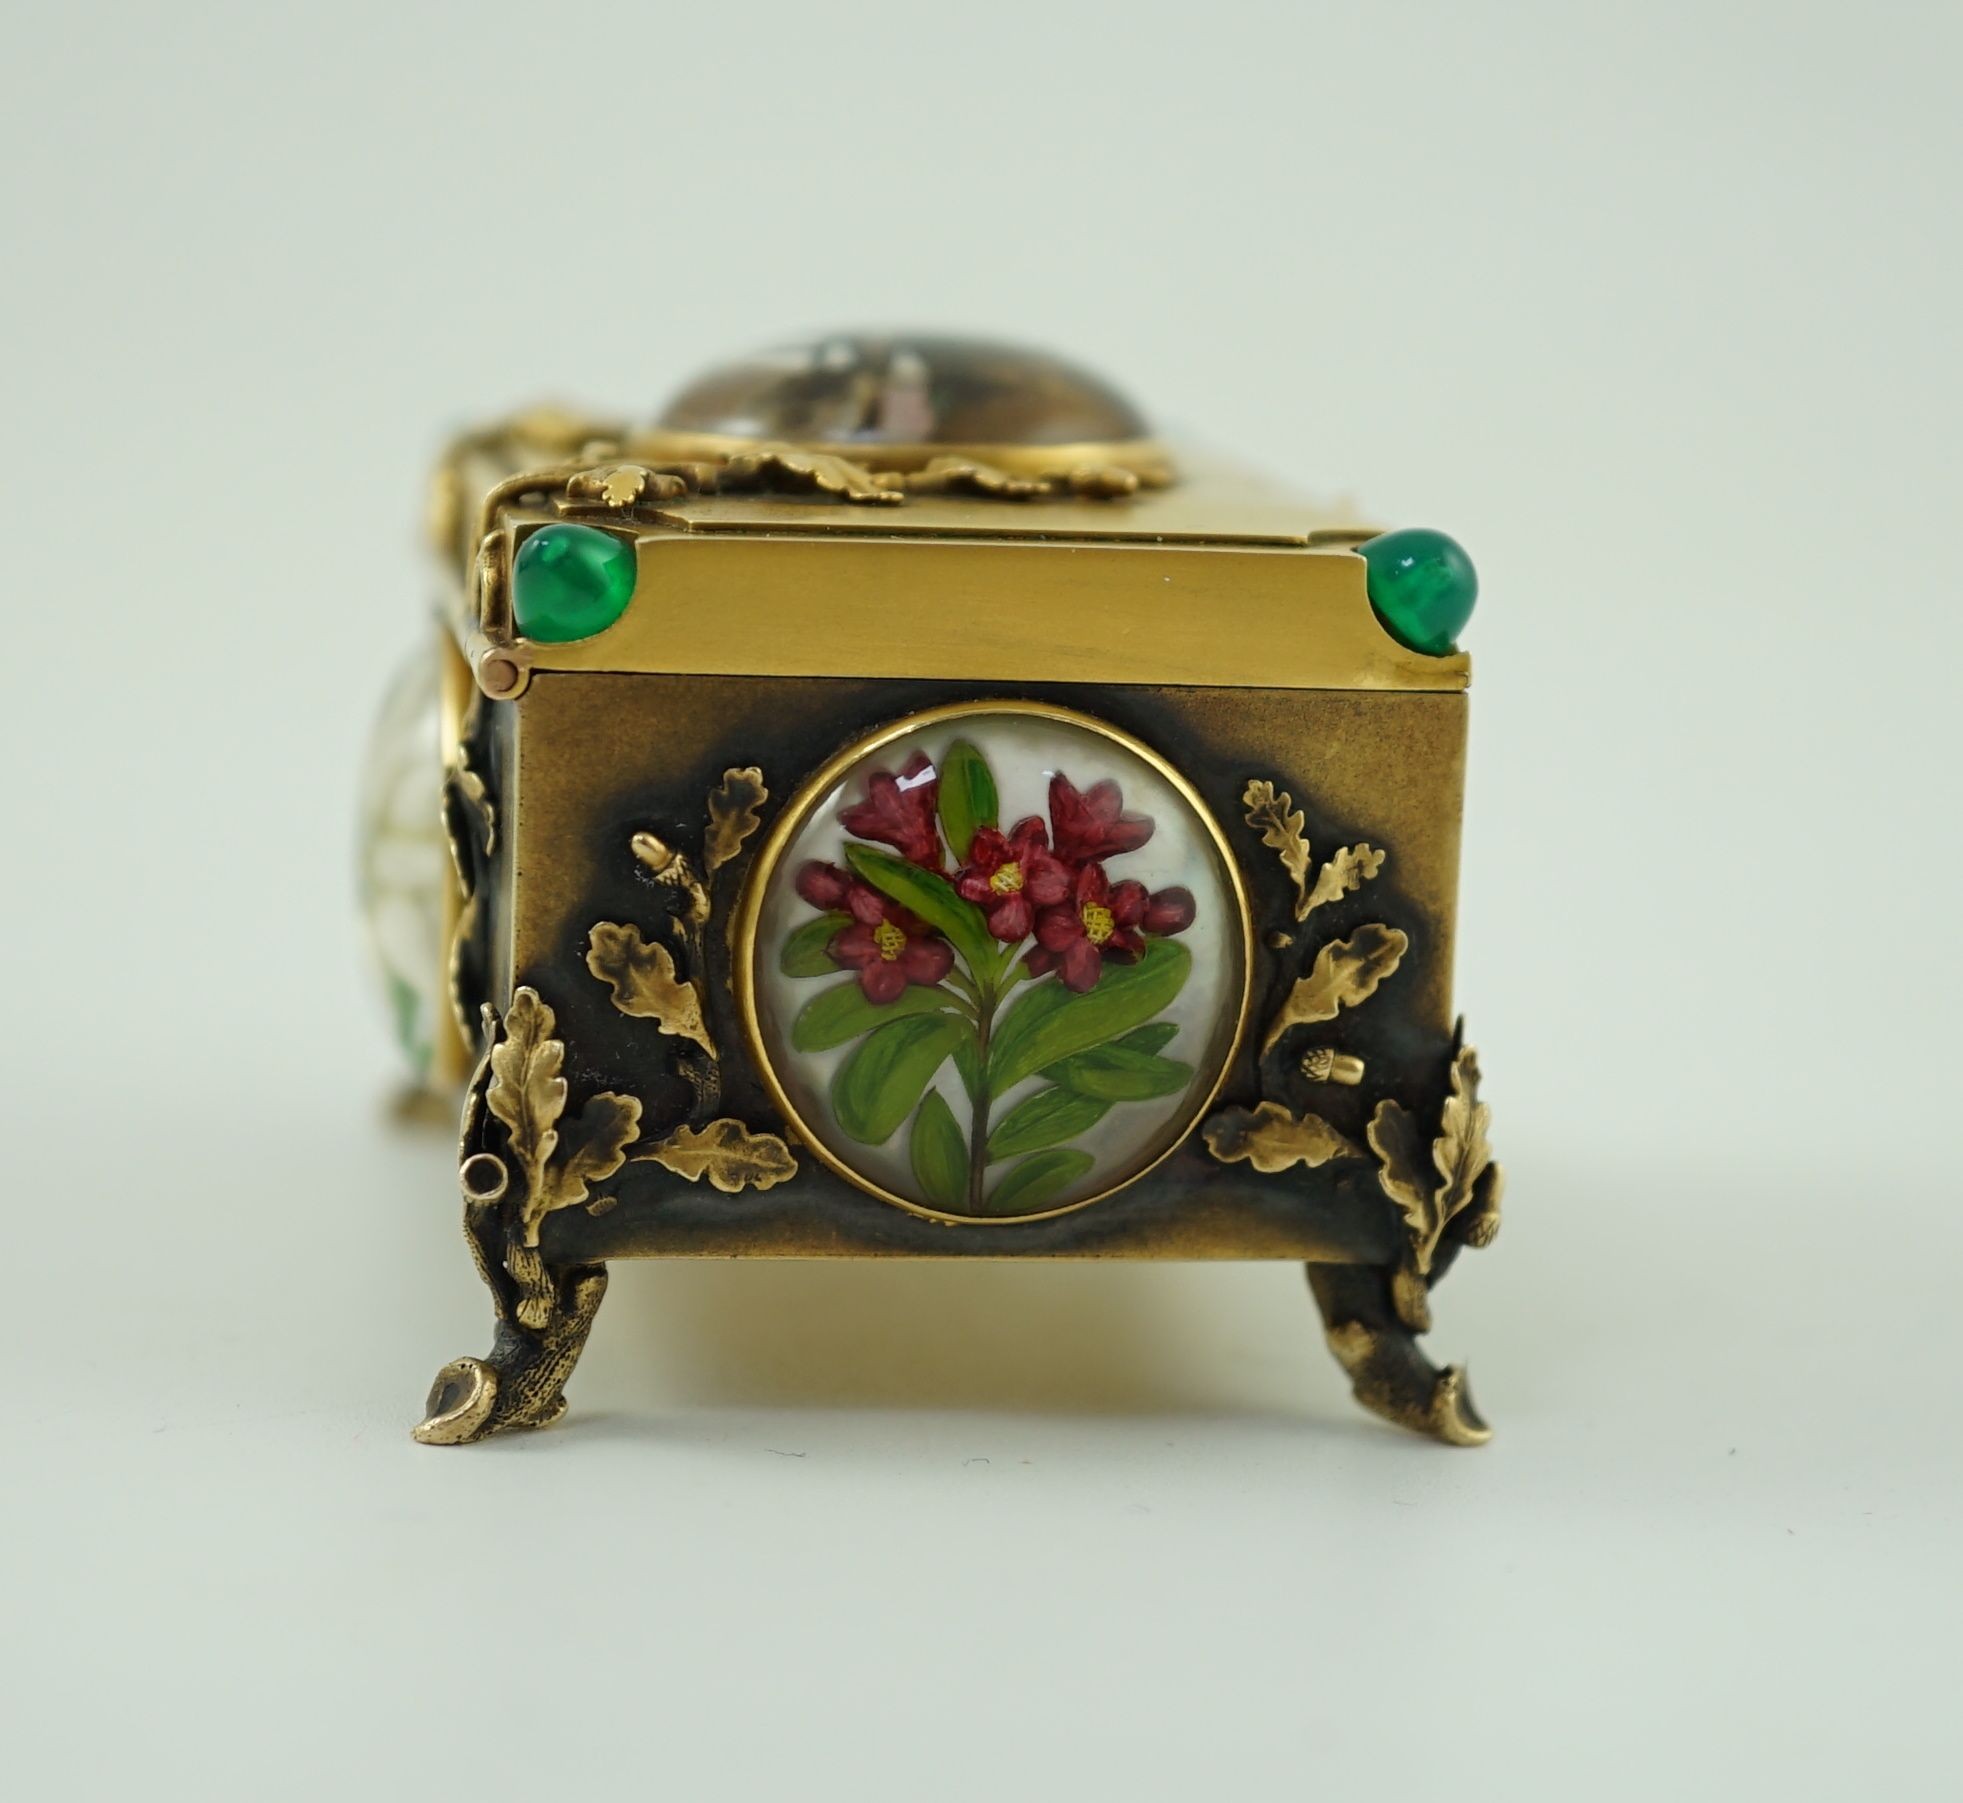 A late 19th/early 20th century Viennese gold, chrysoprase and Essex crystal set small trinket casket, by Josef Siess Sohne, (1895-1922)